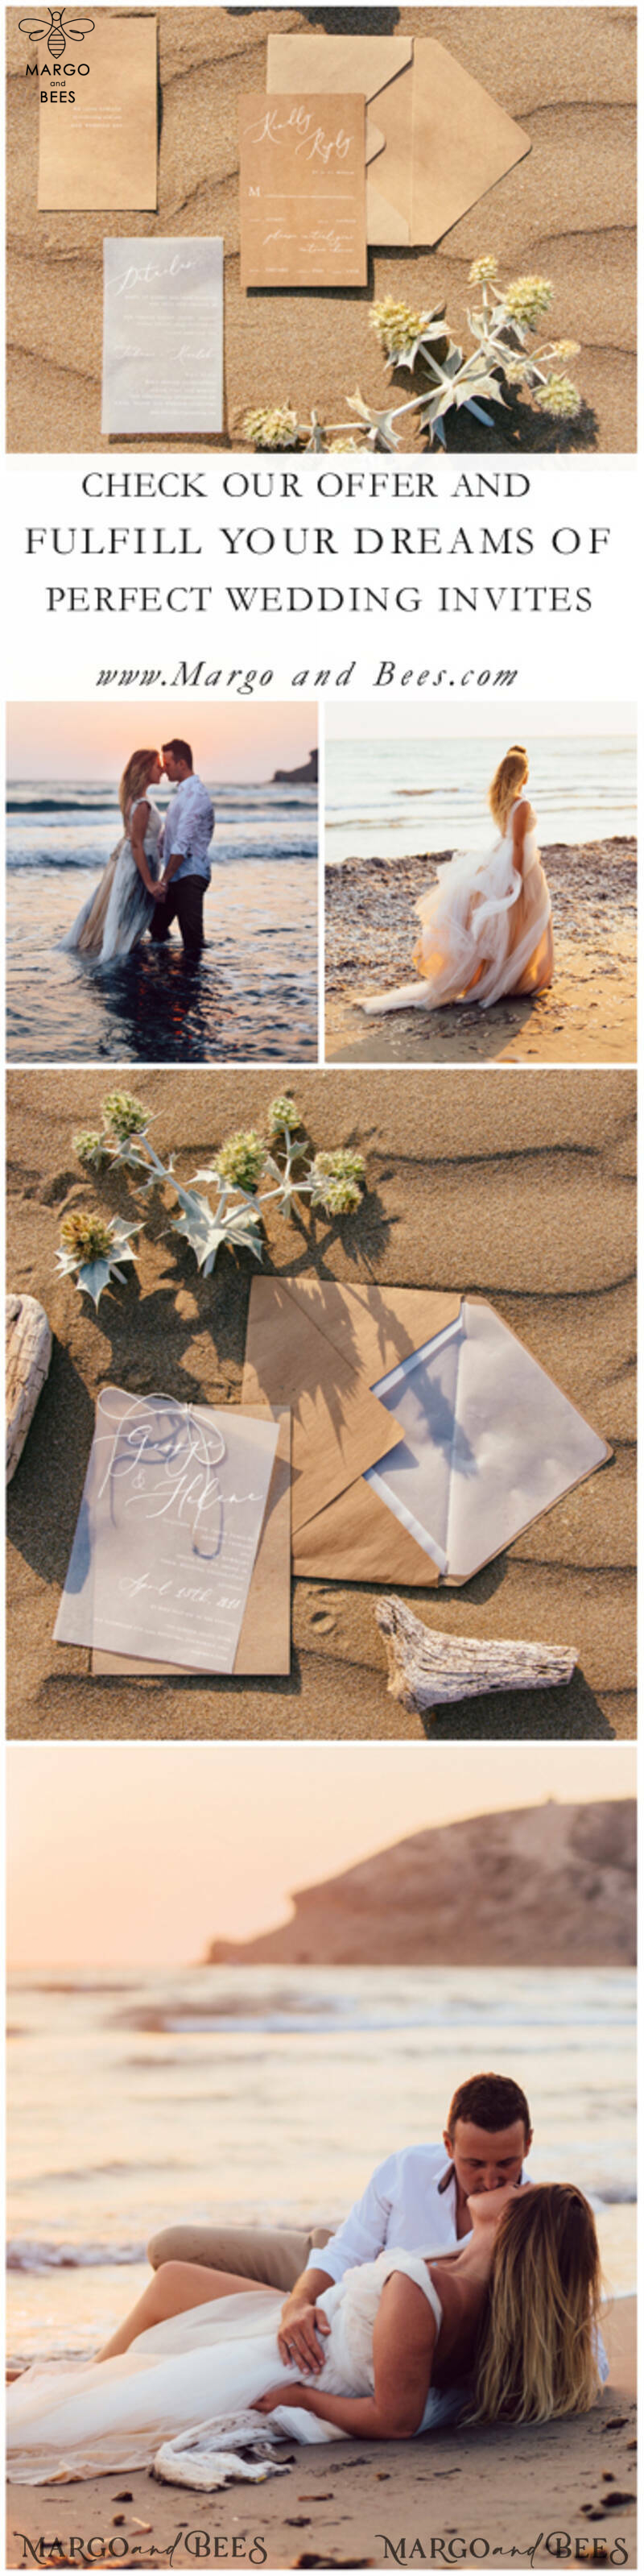 Beach Personalized Wedding Invitations Tropical Vellum Stationery Handmade with Craft Eco Envelope with monogram Liner-5